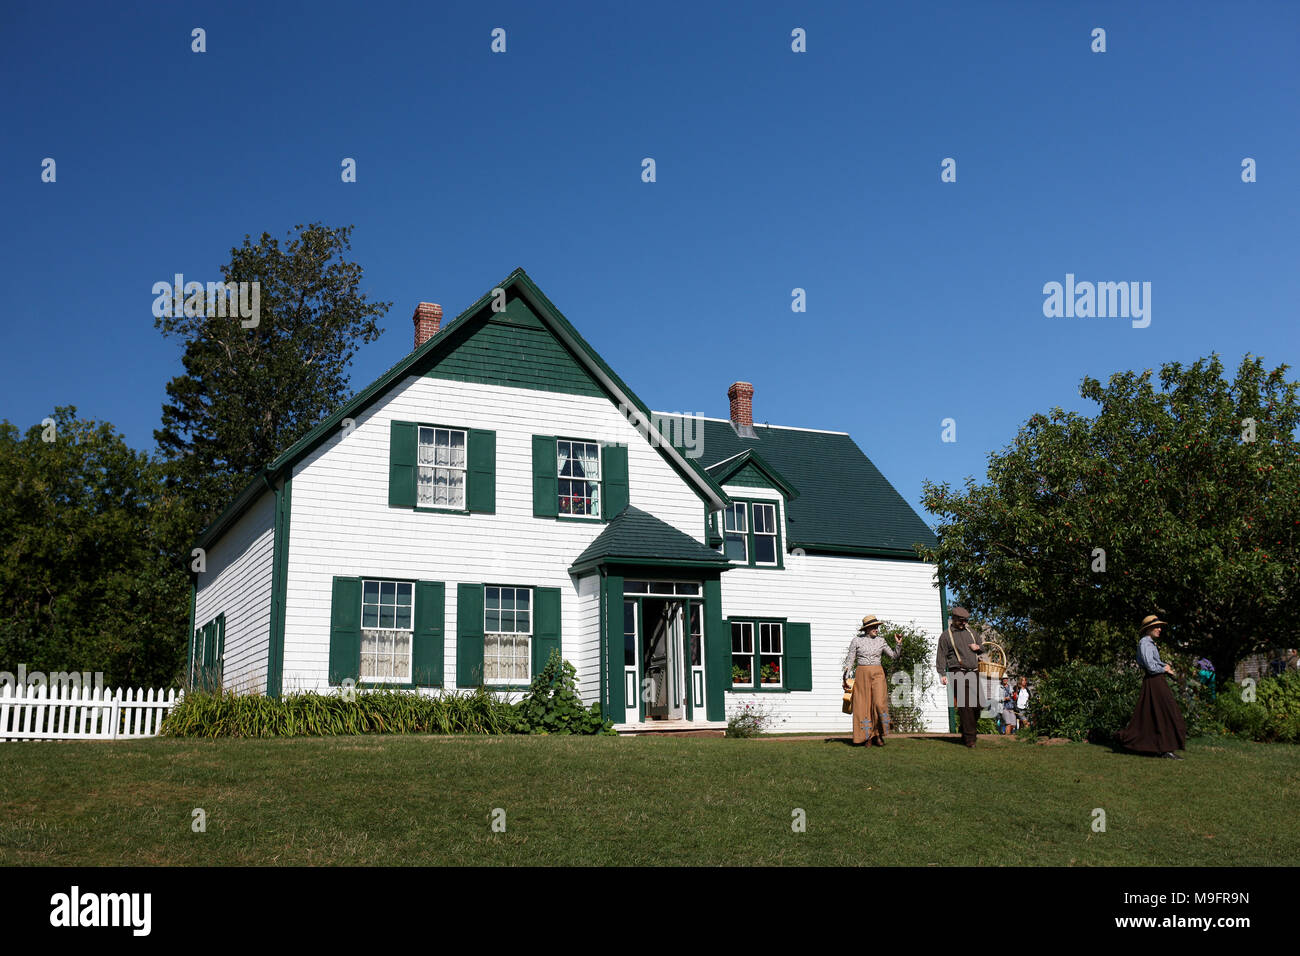 The iconic Green Gables farm house from the Lucy Maud Montgomery novel Anne of Green Gables. Stock Photo